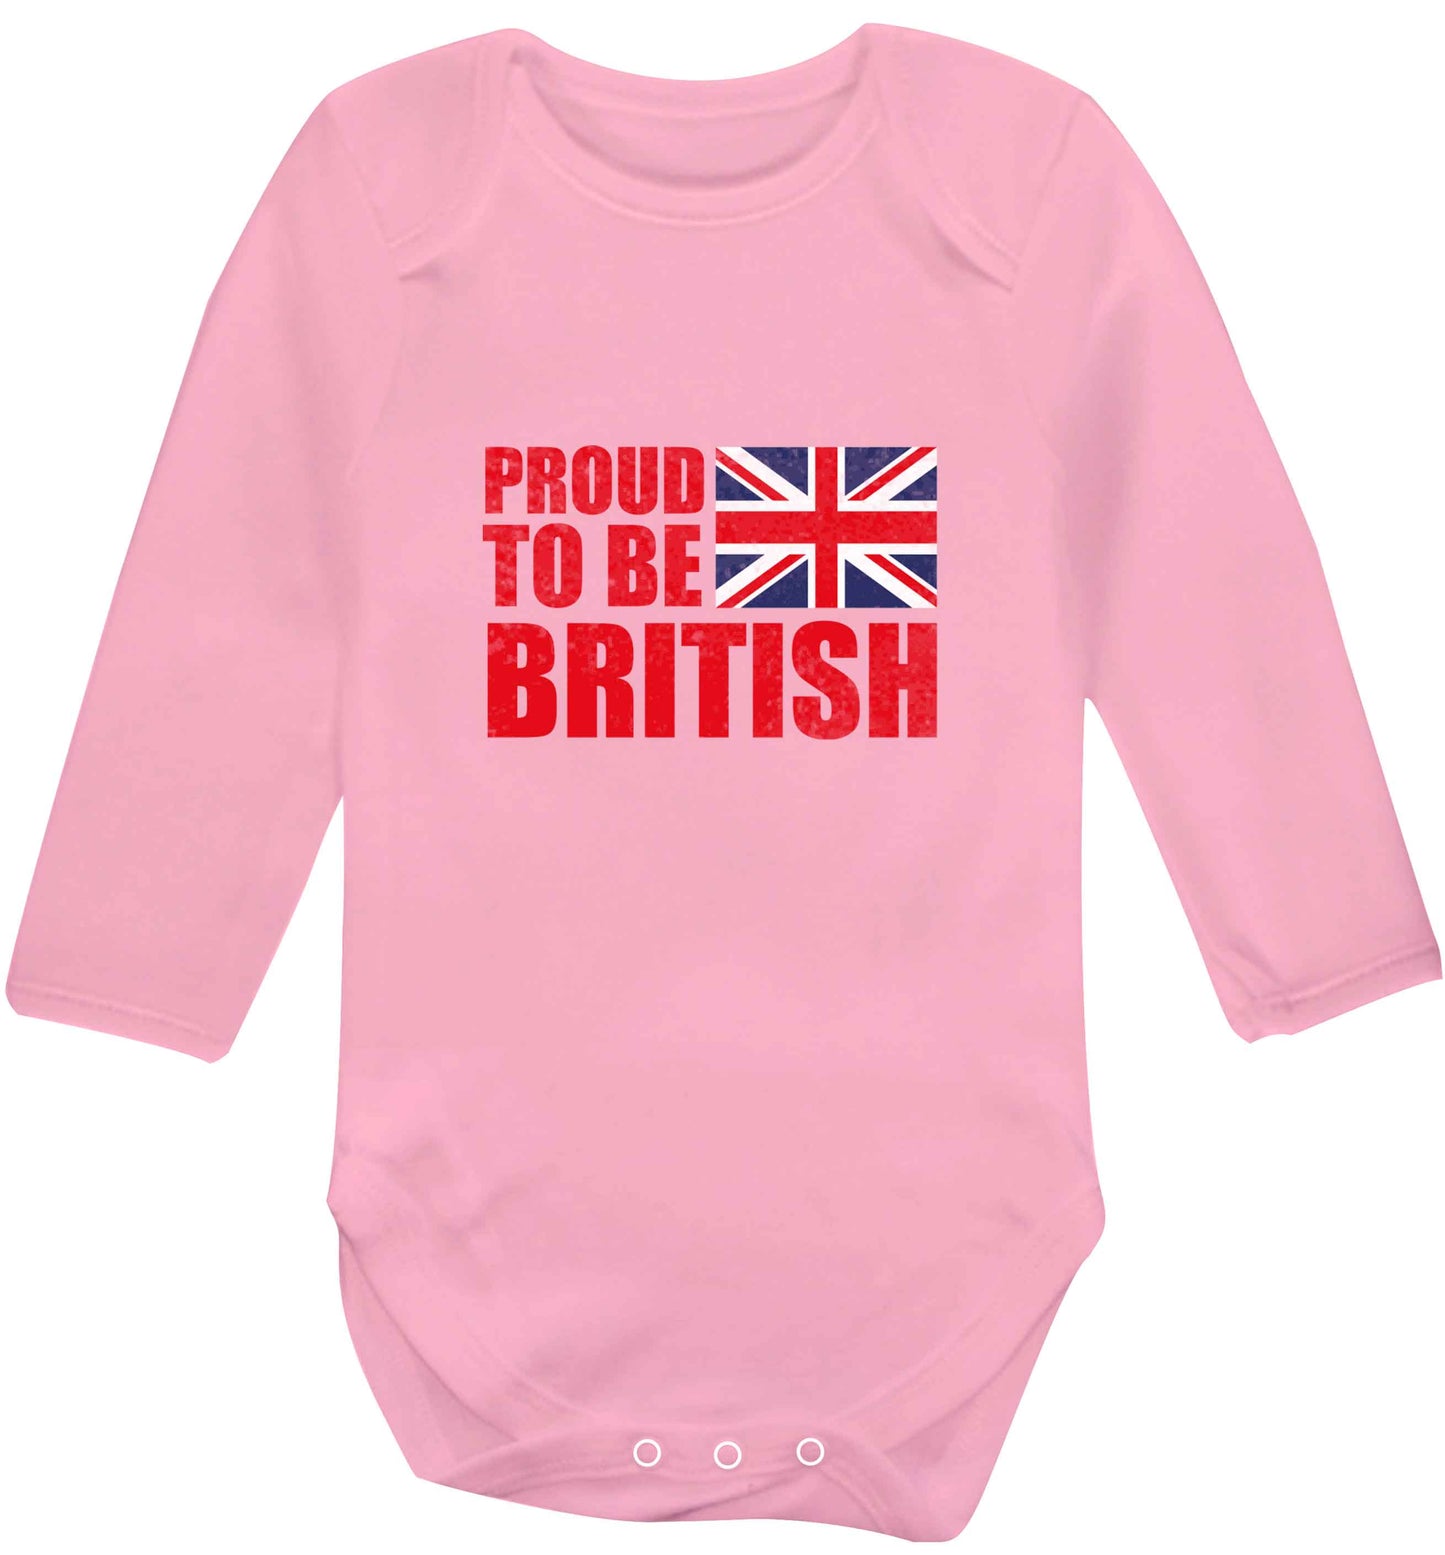 Proud to be British baby vest long sleeved pale pink 6-12 months